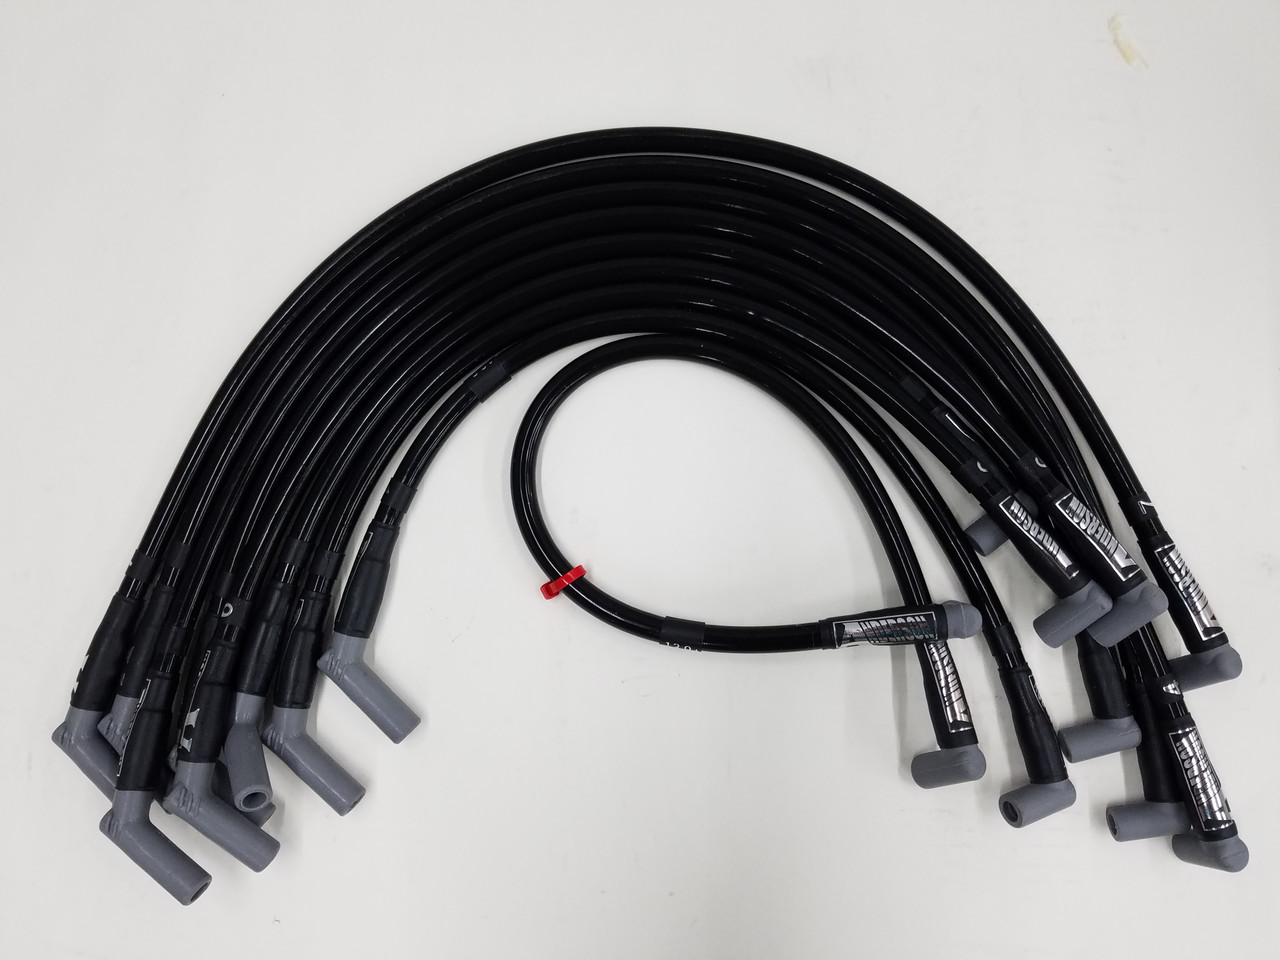 Anderson Super 14 Extreme Spark Plug Wires Black. Fits 86-93 5.0L Mustang -  Anderson Ford Motorsport